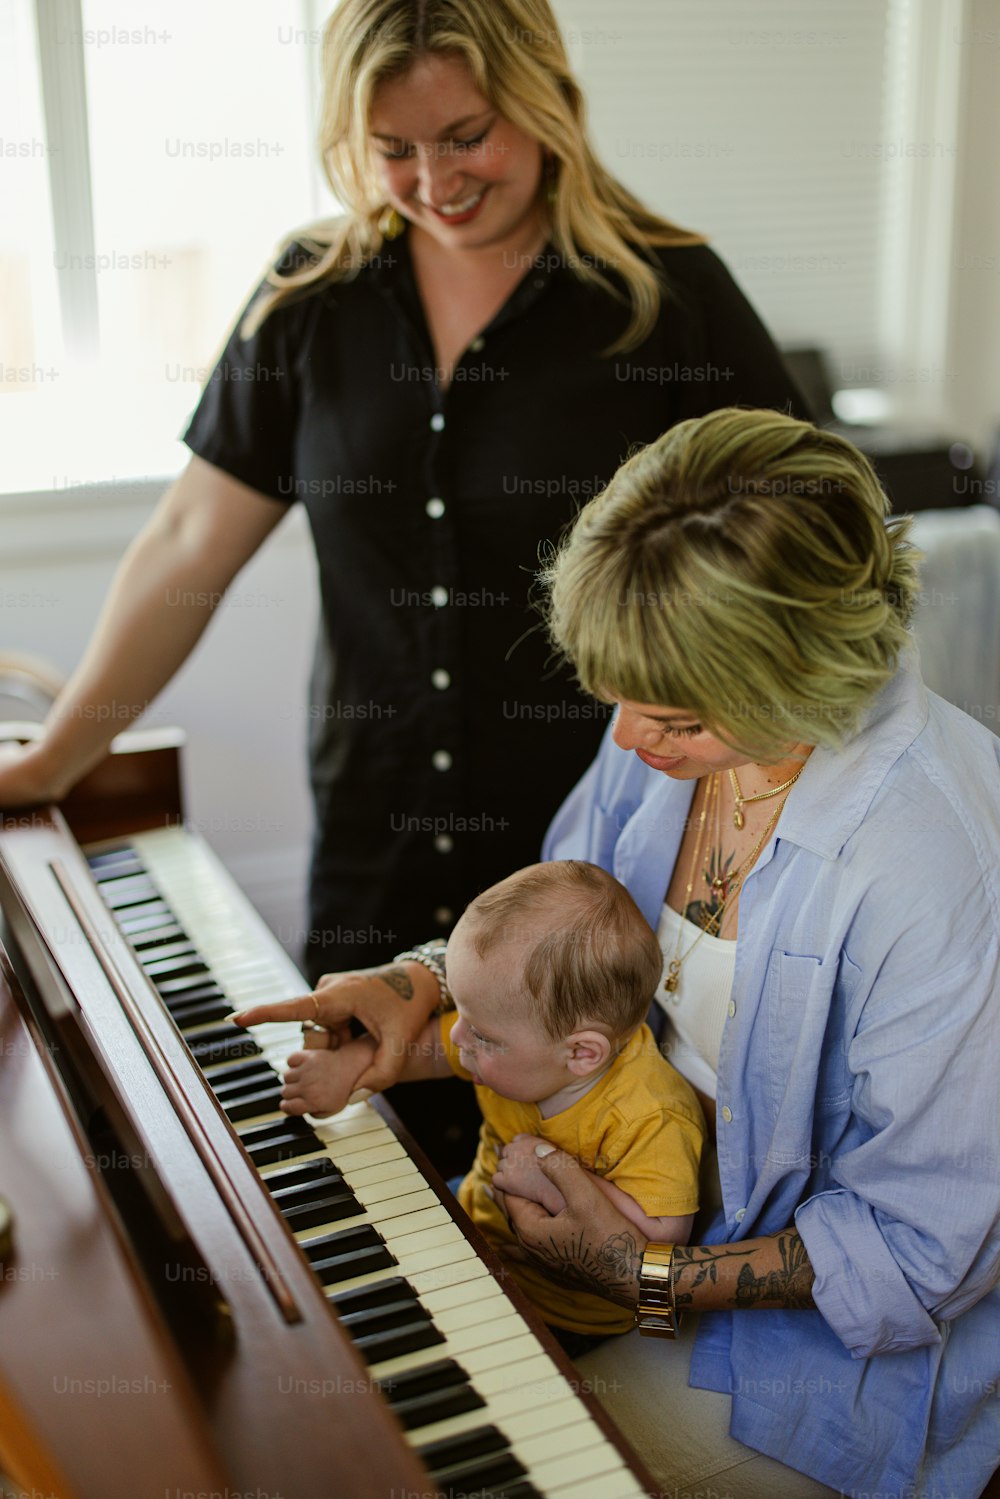 a woman is playing a piano with a baby